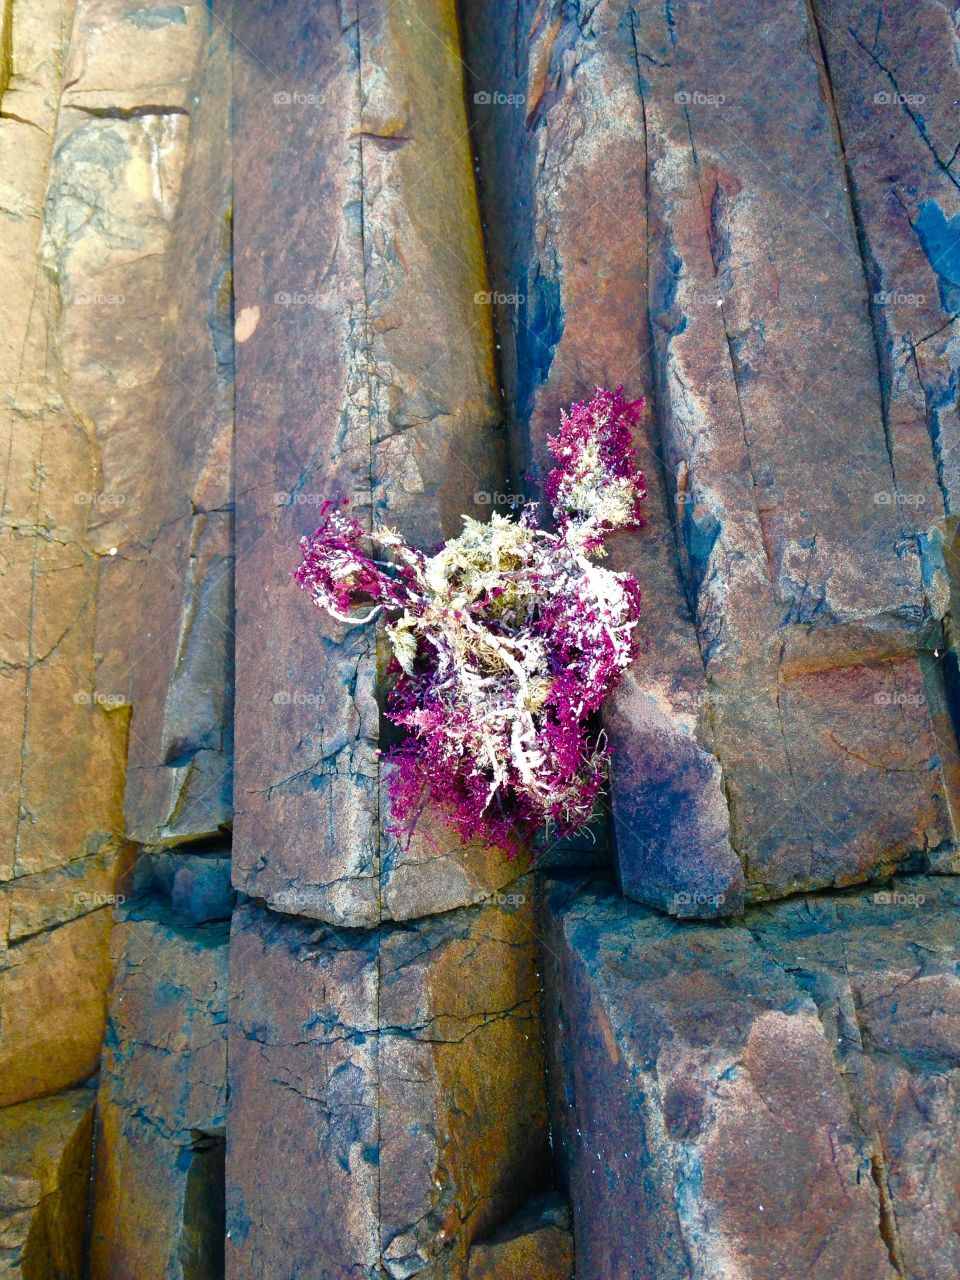 Purple seaweed fixed to the rock in the form of steps.